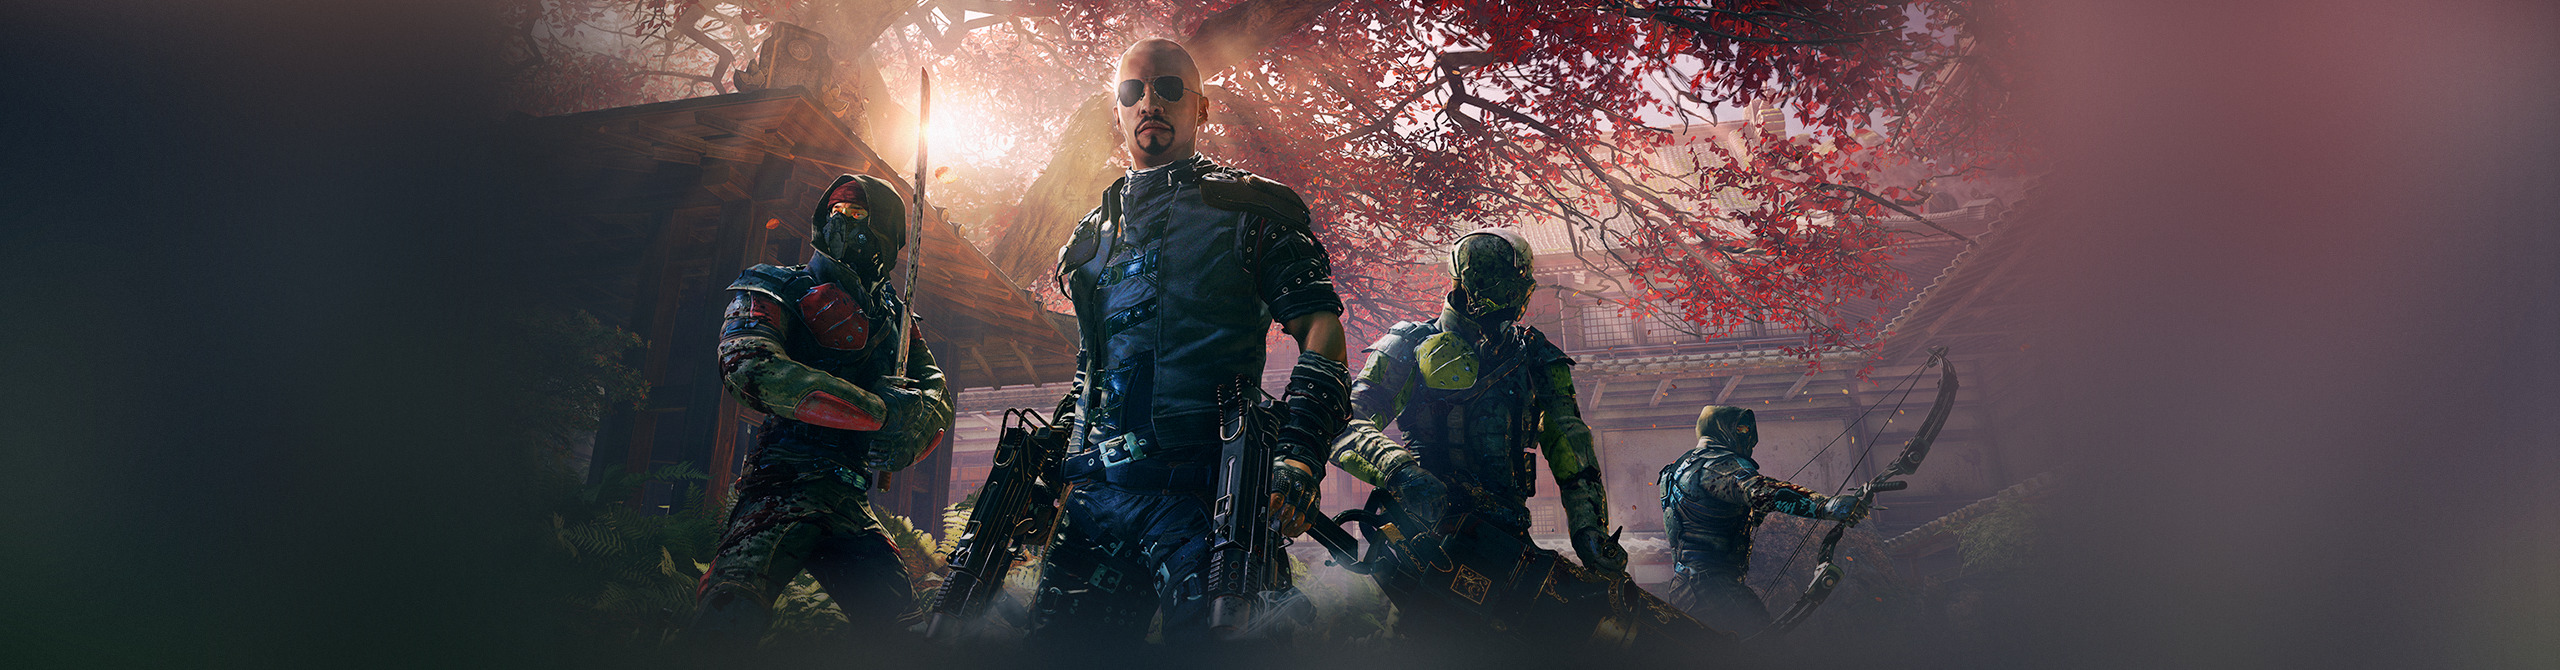 download shadow warrior 2 gog for free